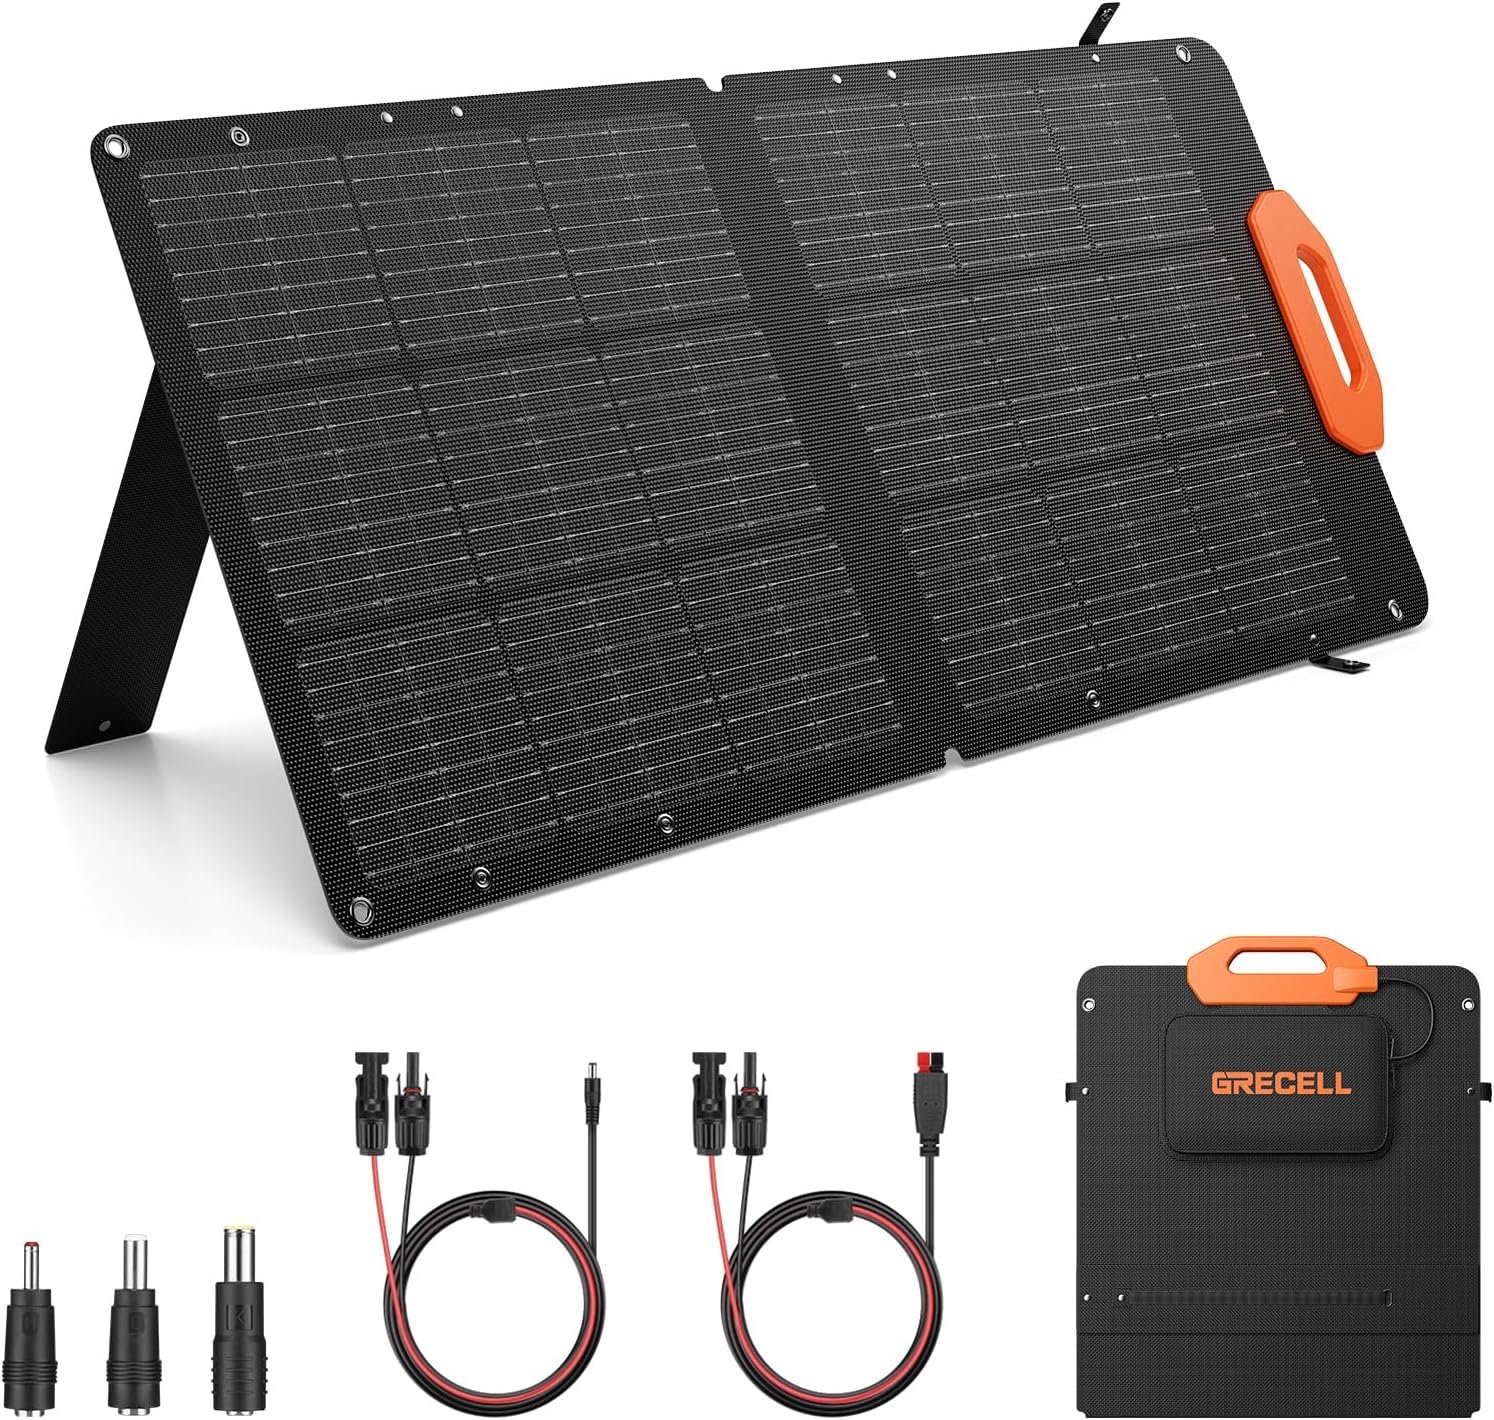 GRECELL Solar Panel 100W for Power Station Portable Solar Panel with MC-4